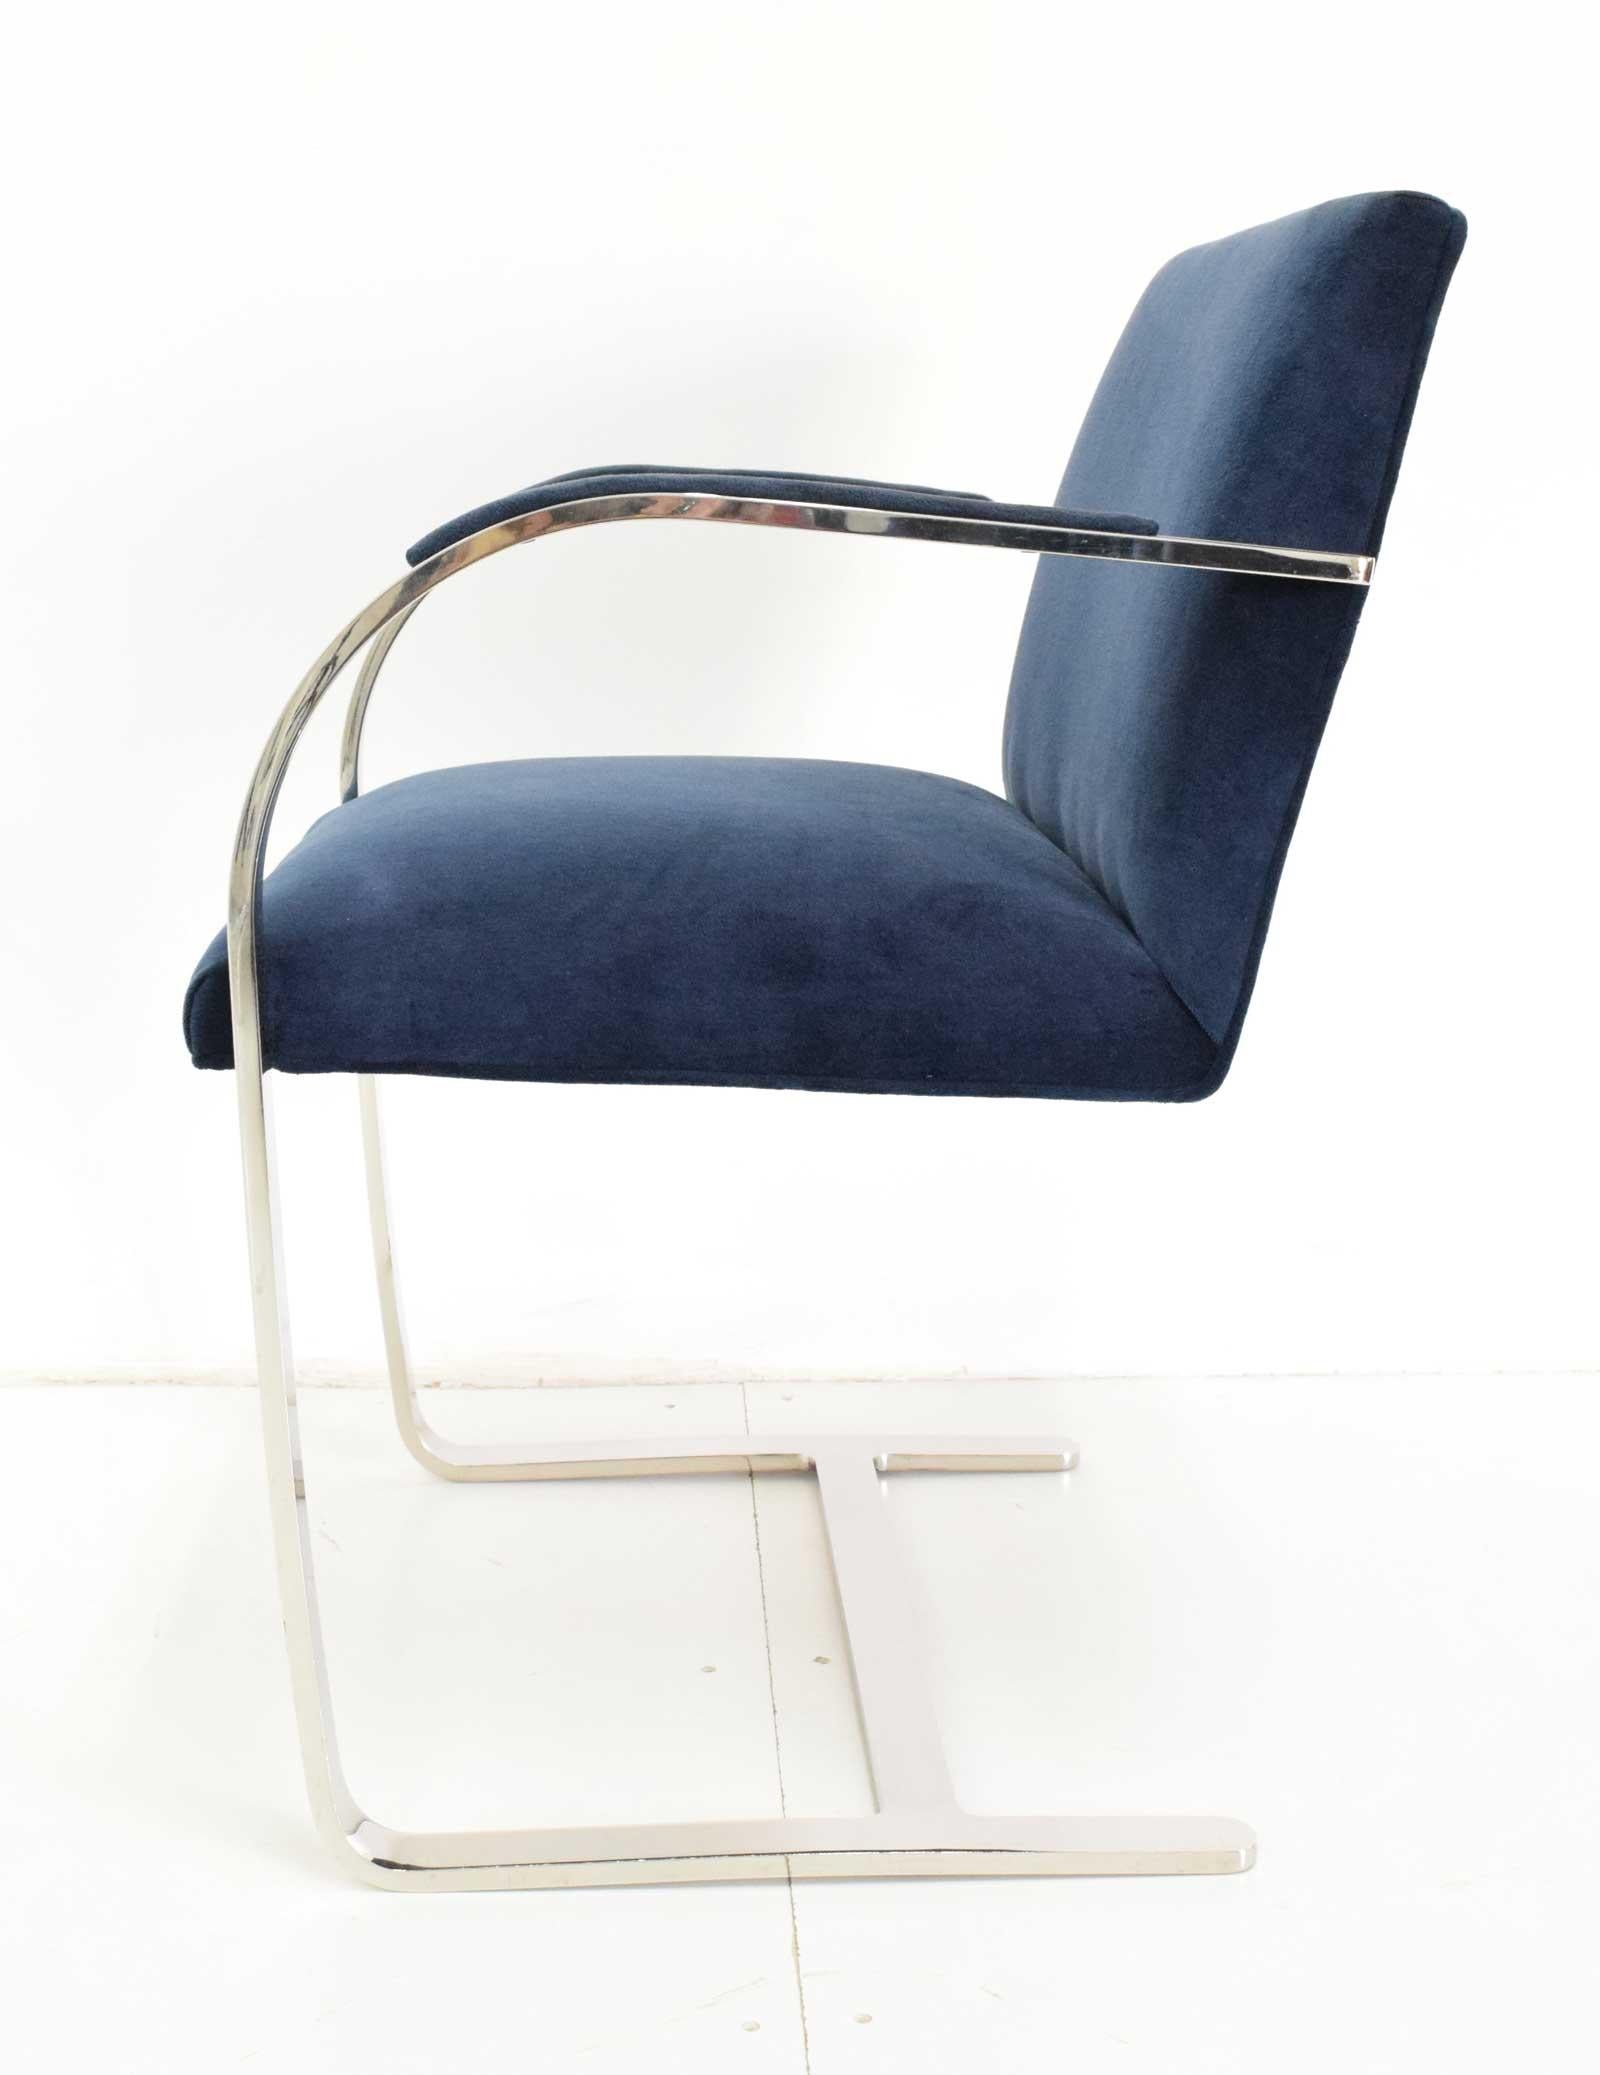 American Stainless Steel Flatbar Brno Chairs by Knoll in Blue Velvet